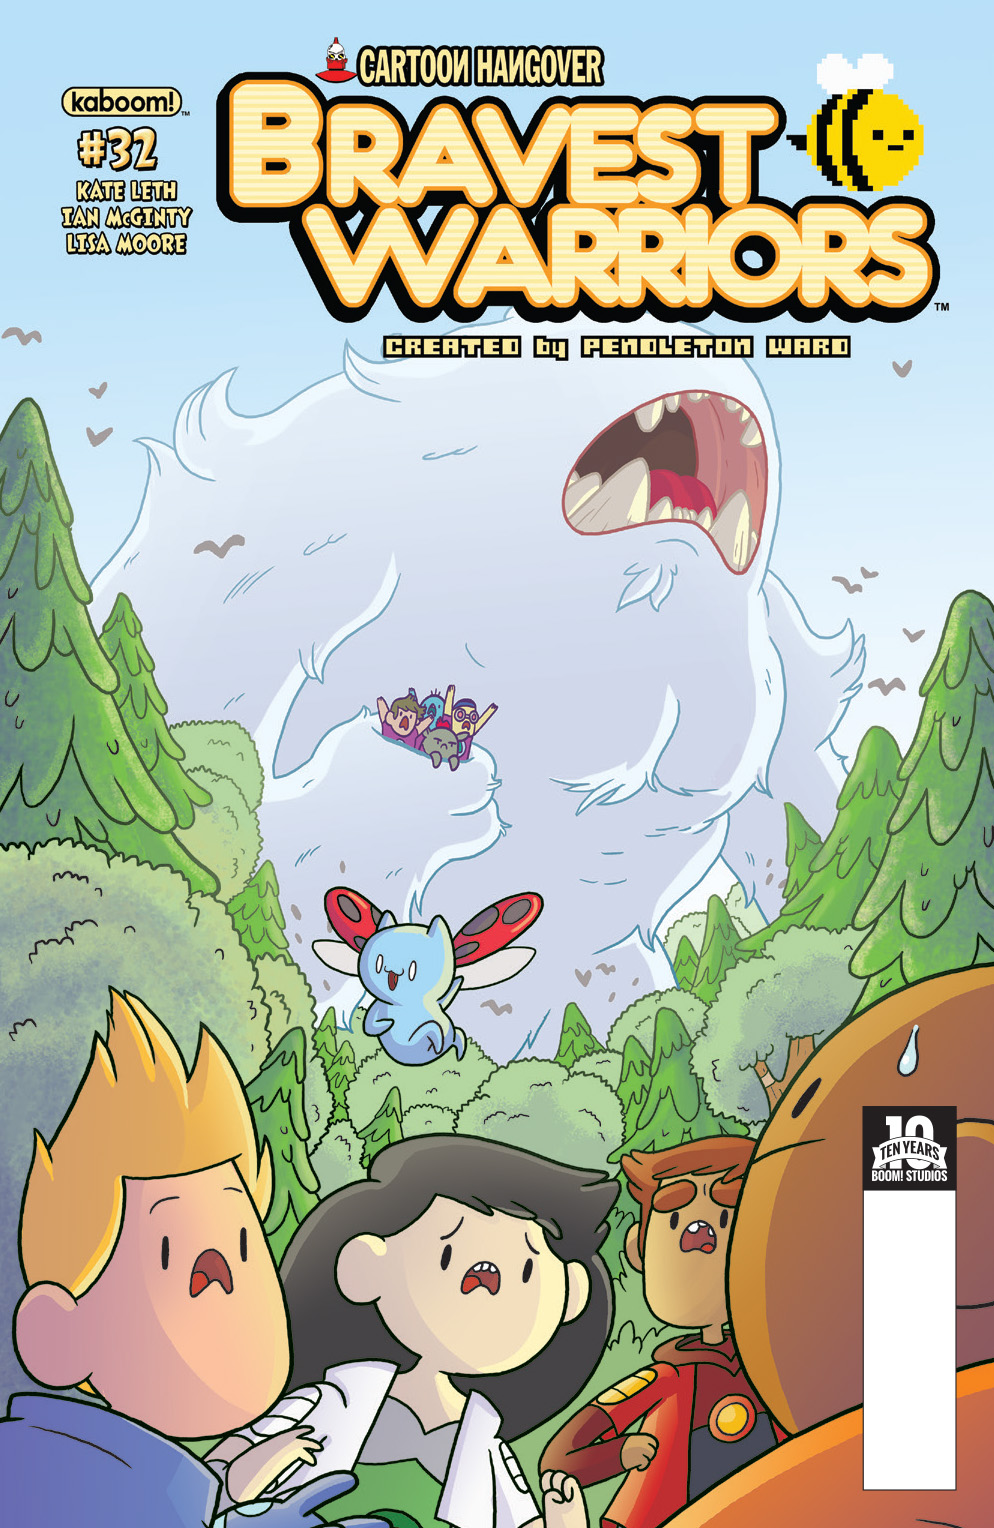 Bravest Warriors #32 Preview